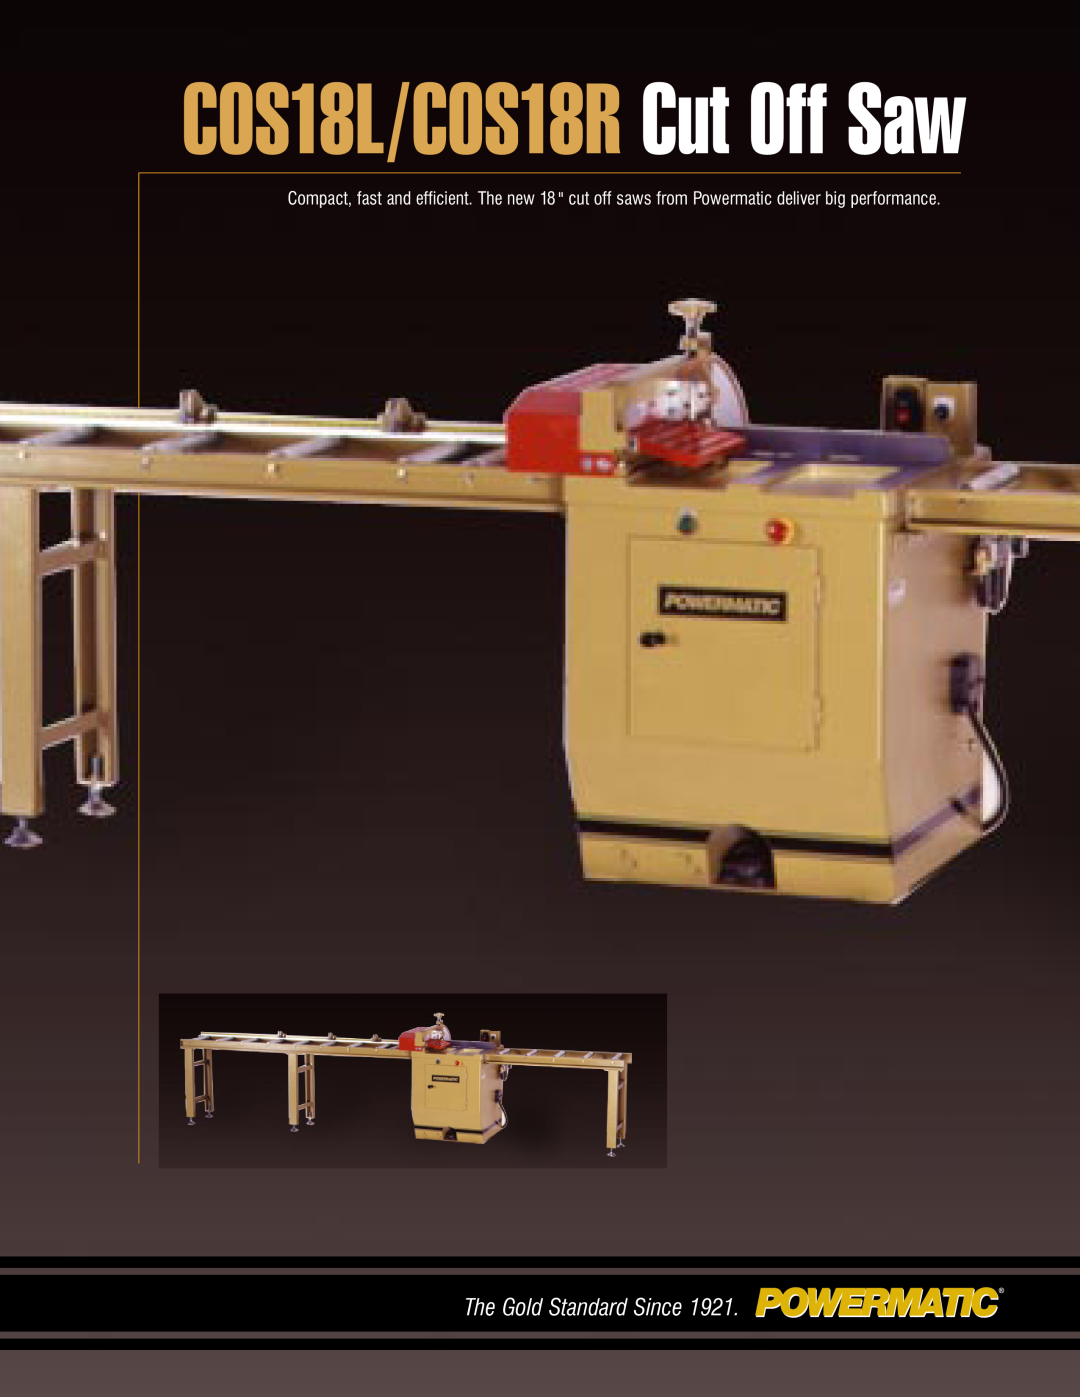 Jet Tools manual The Gold Standard Since, COS18L/COS18R Cut Off Saw 